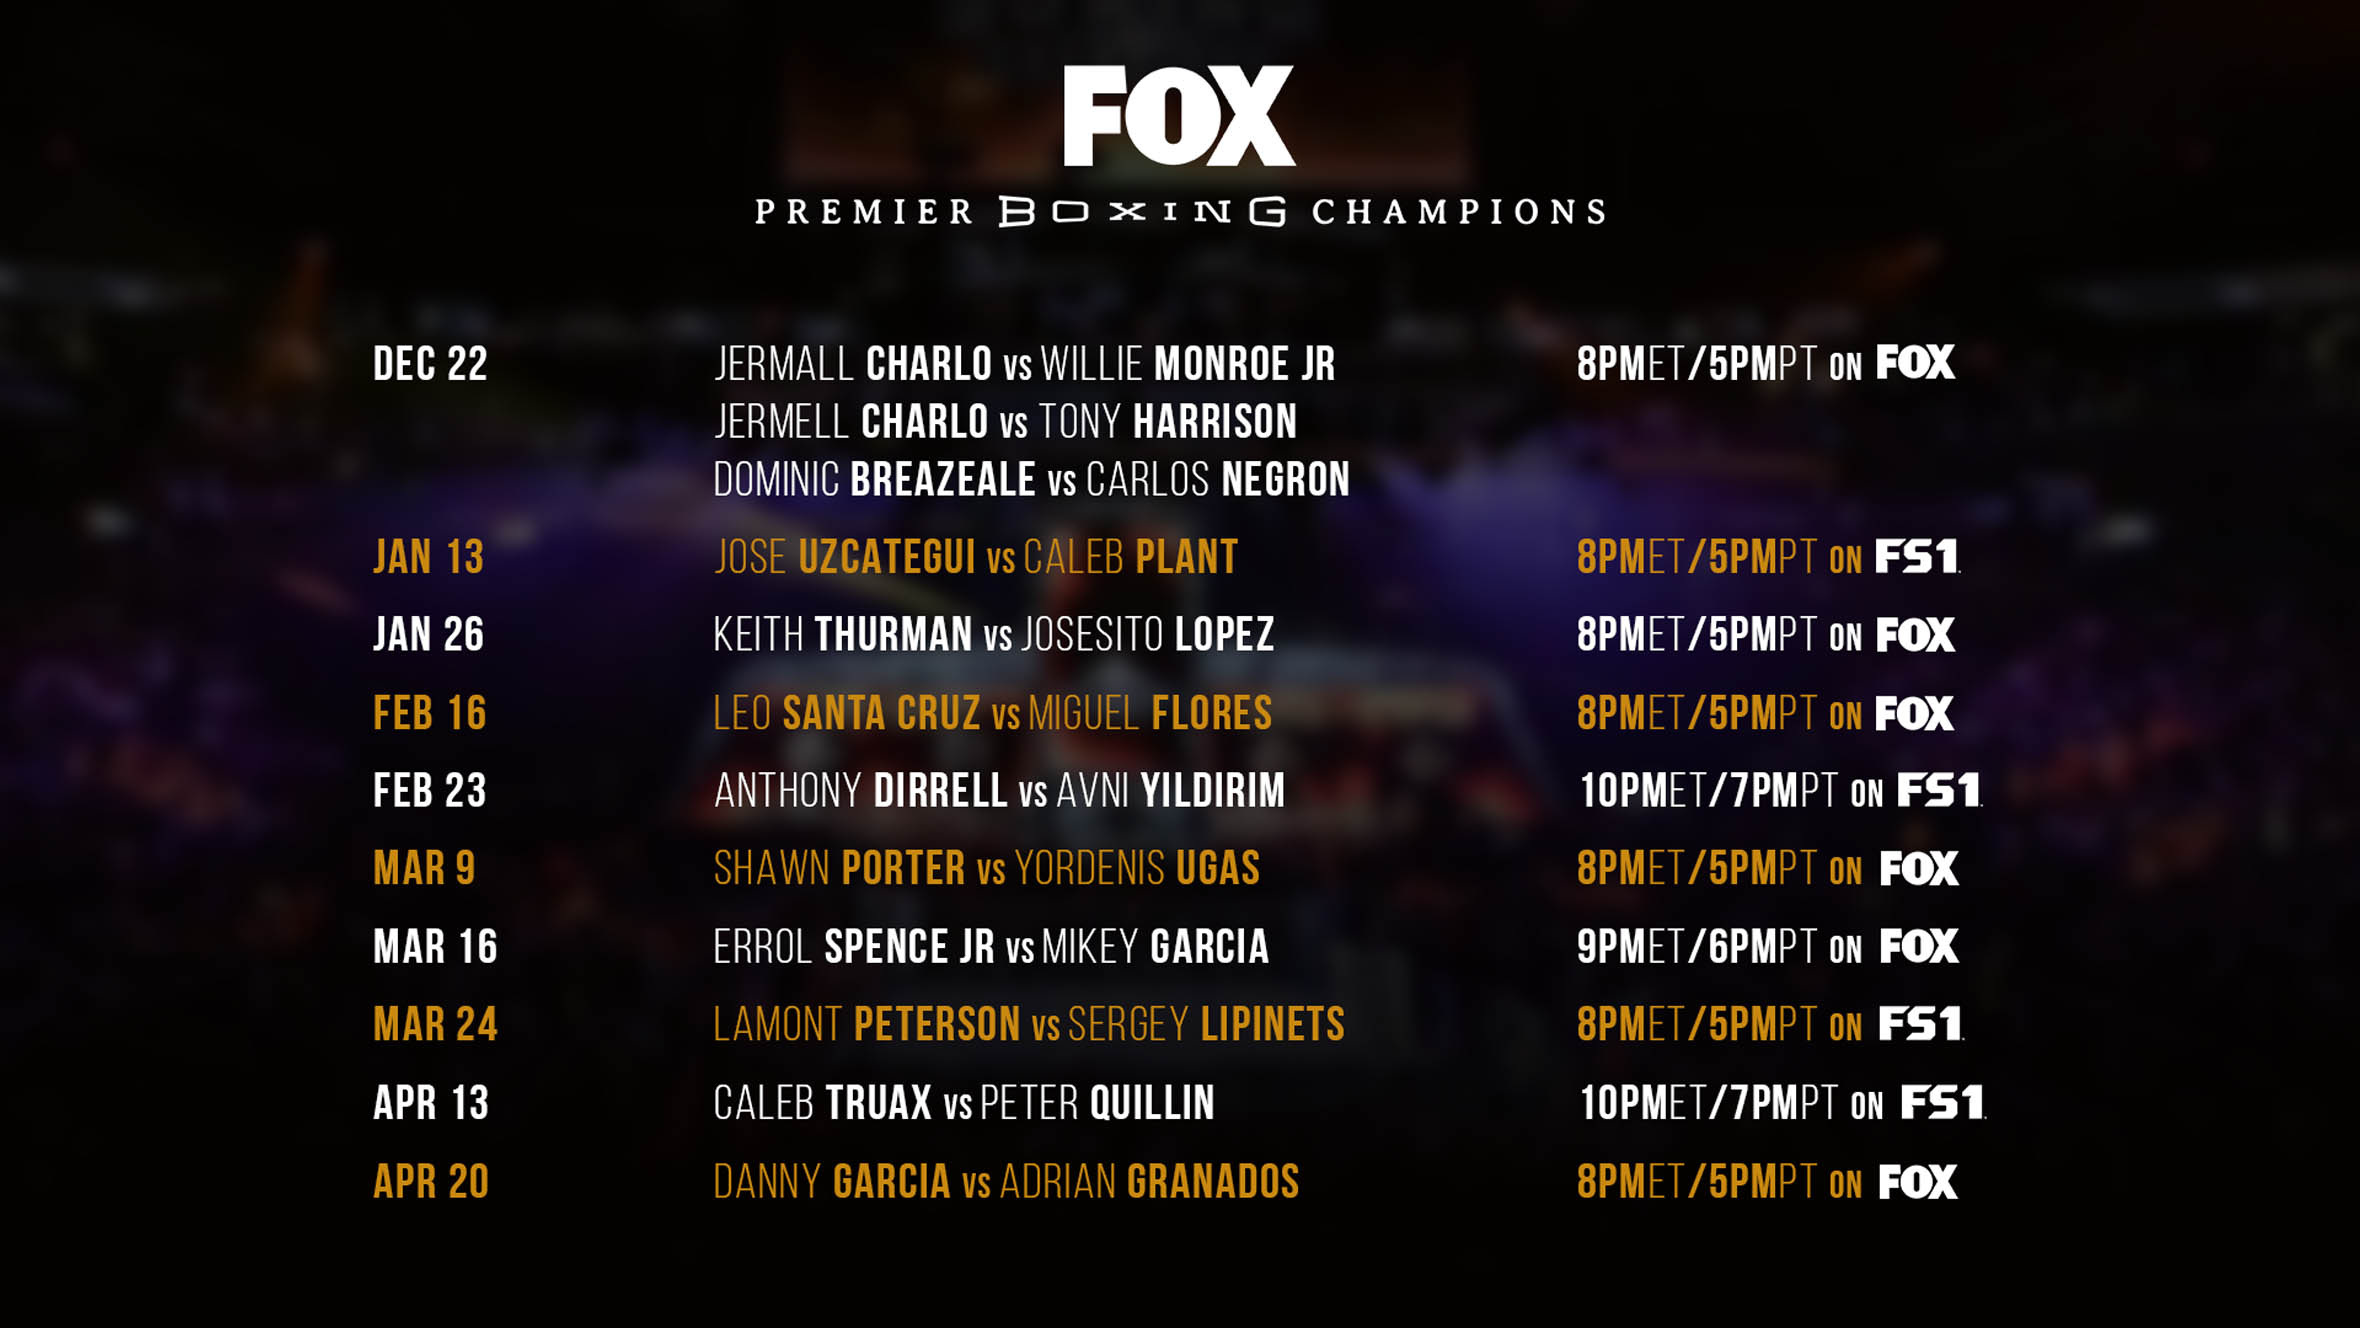 Sump fornuft missil FOX Sports and Premier Boxing Champions announce eight title  fights—including Errol Spence Jr. vs Mikey Garcia PPV